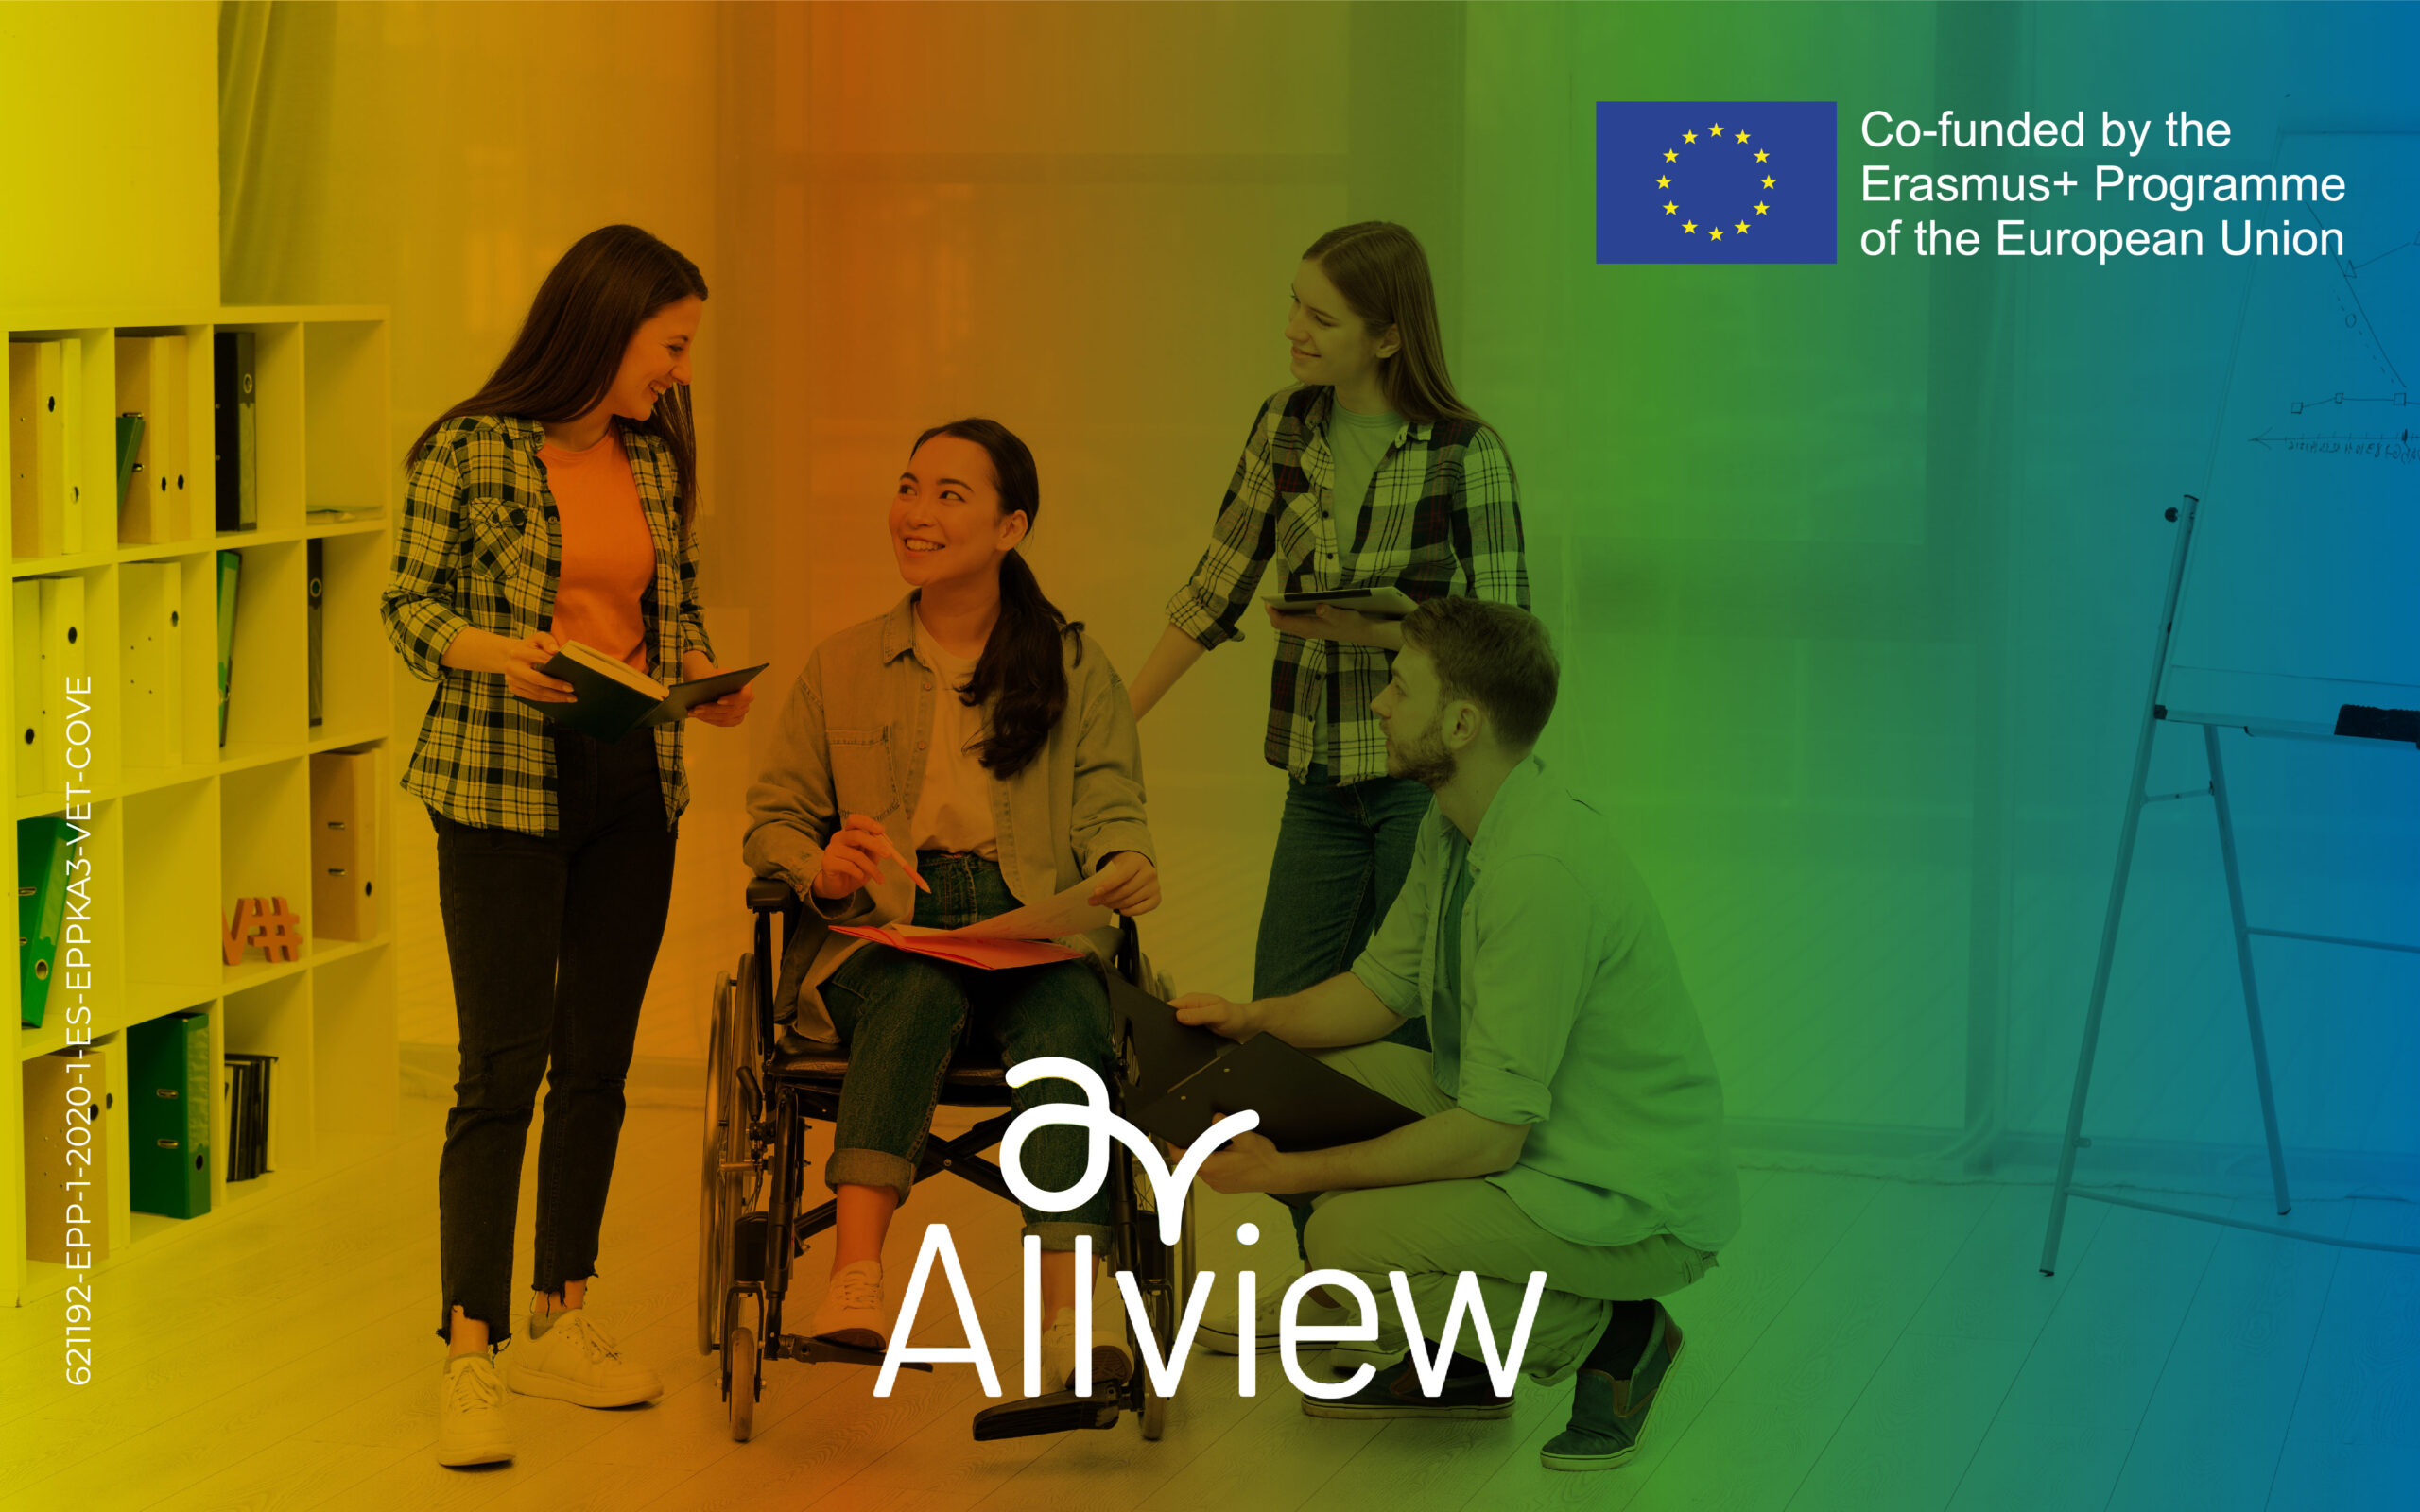 CSR in the wood and furniture sector: the latest report that analyzes national and regional policies on the inclusion of people with special needs and disabilities in the workplace and training